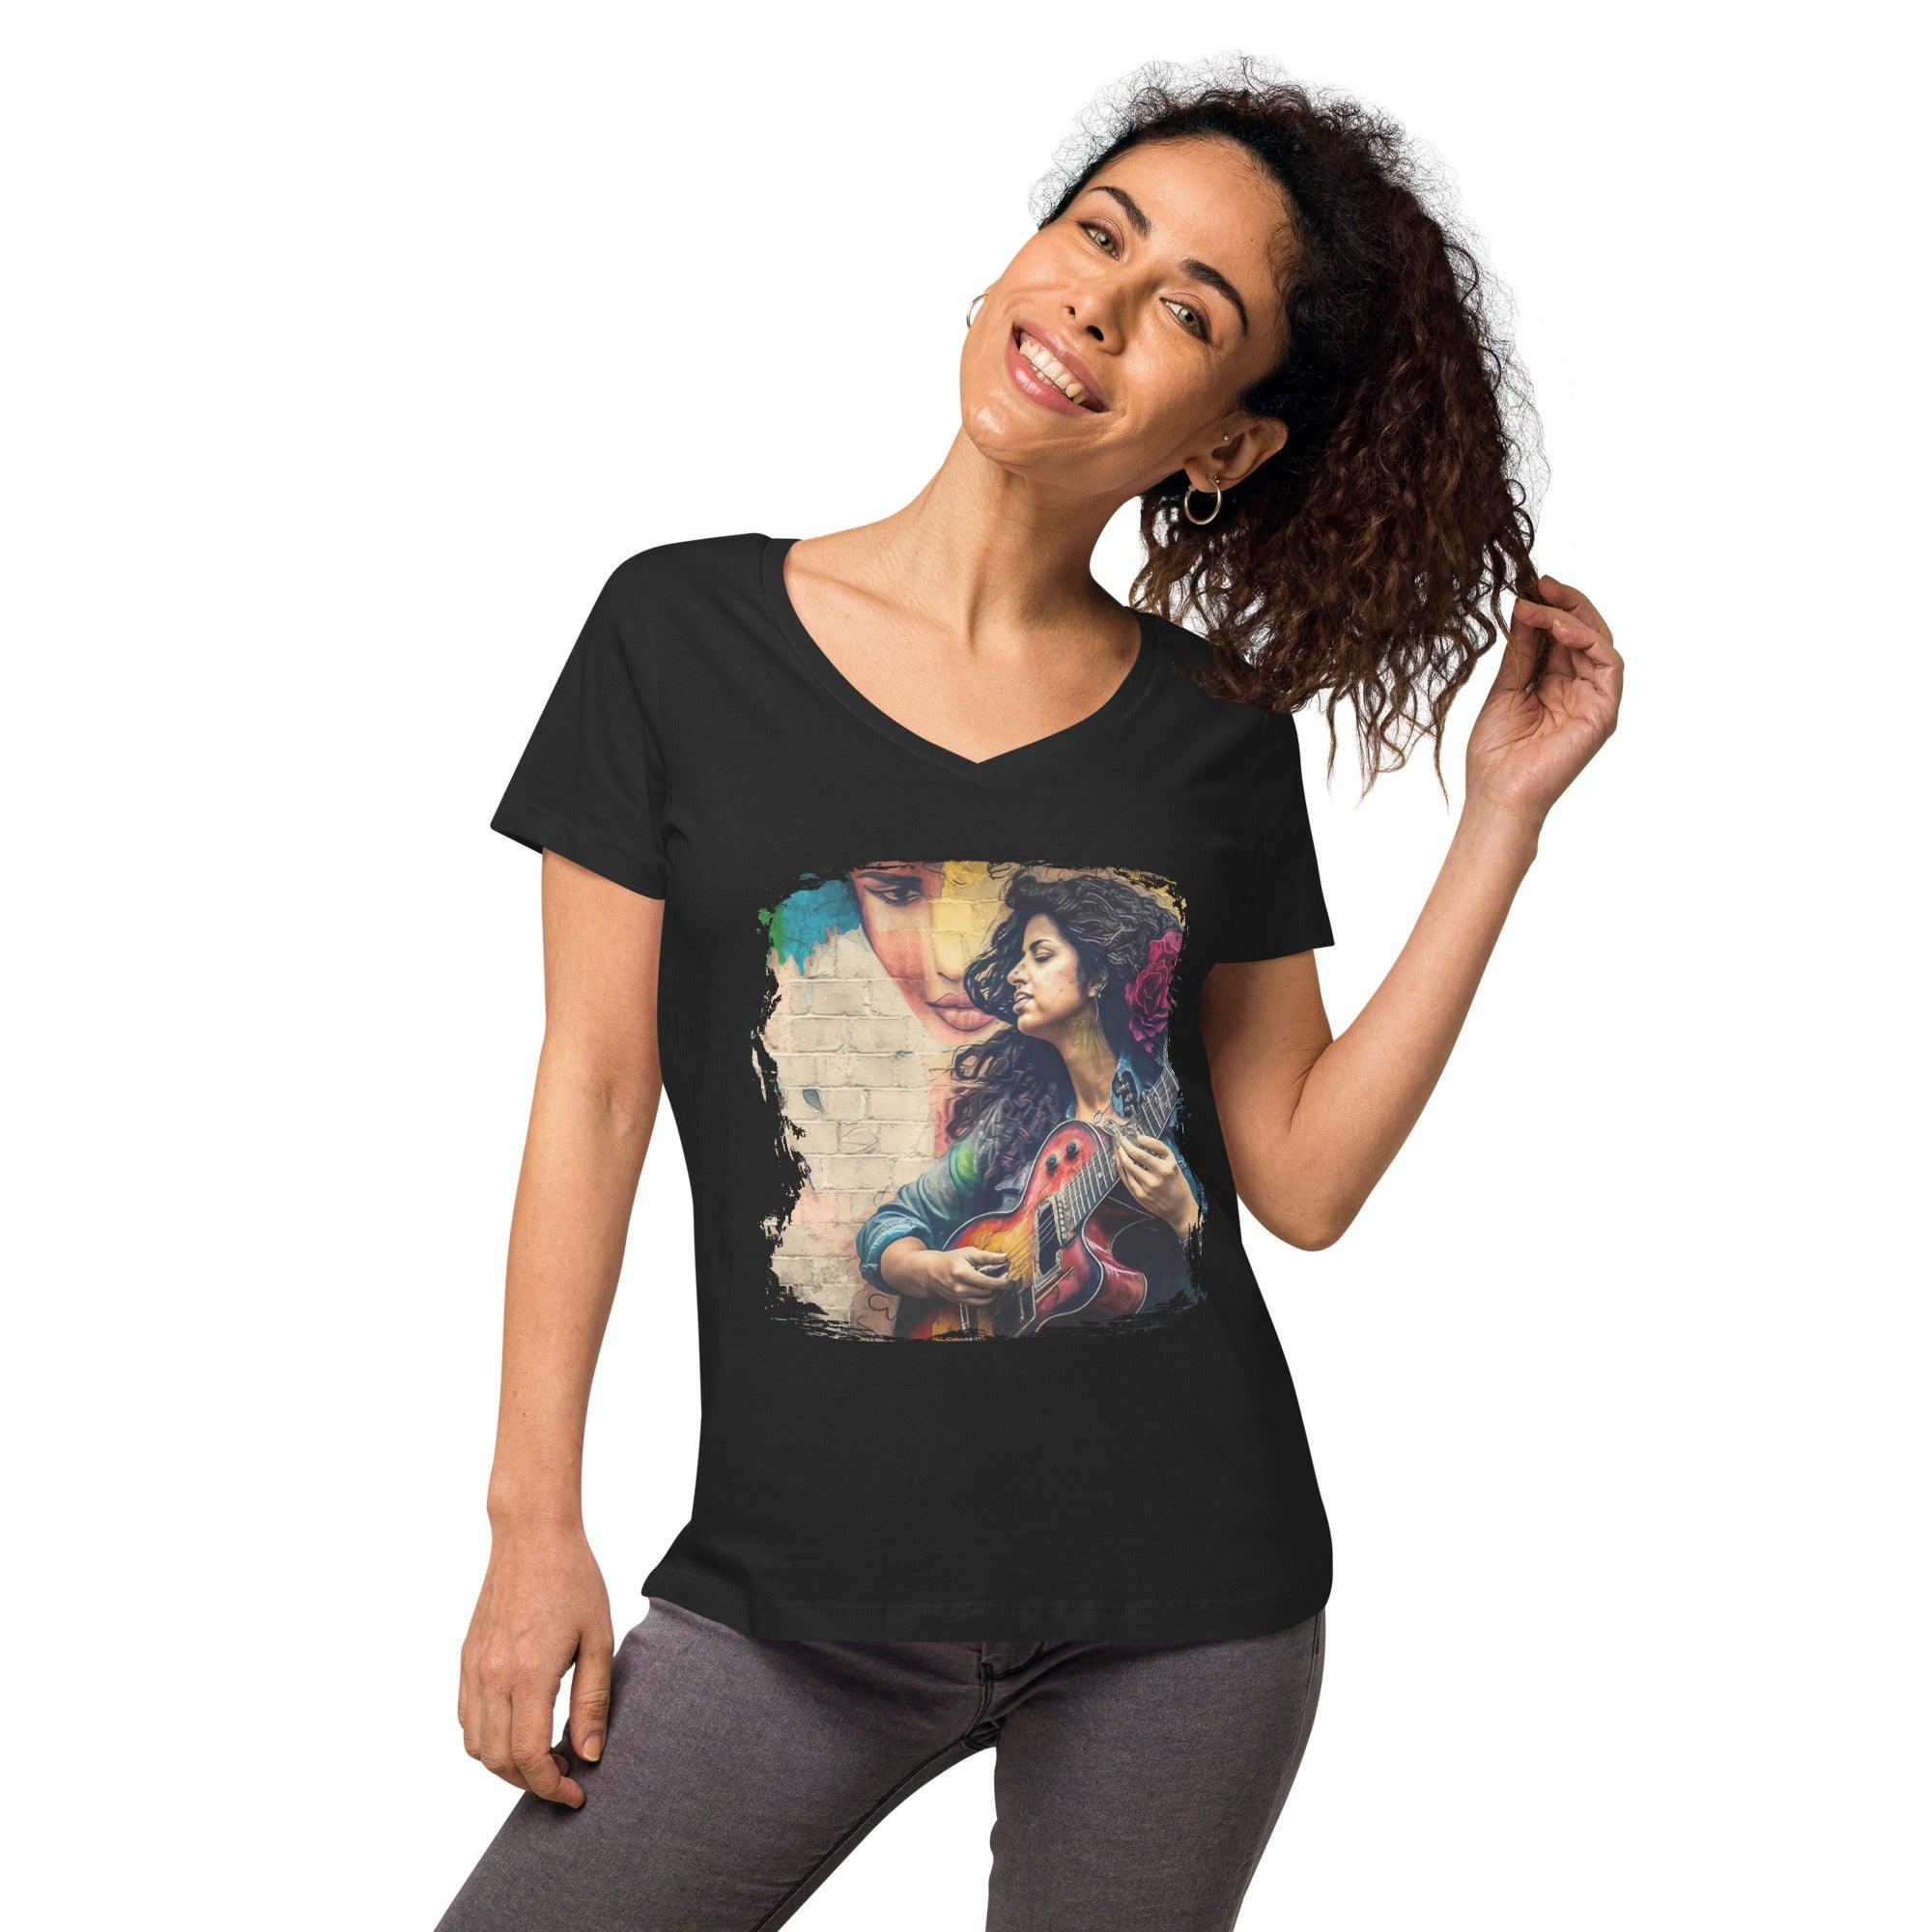 Guitar Speaks Her Language Women’s Fitted V-neck T-shirt - Beyond T-shirts